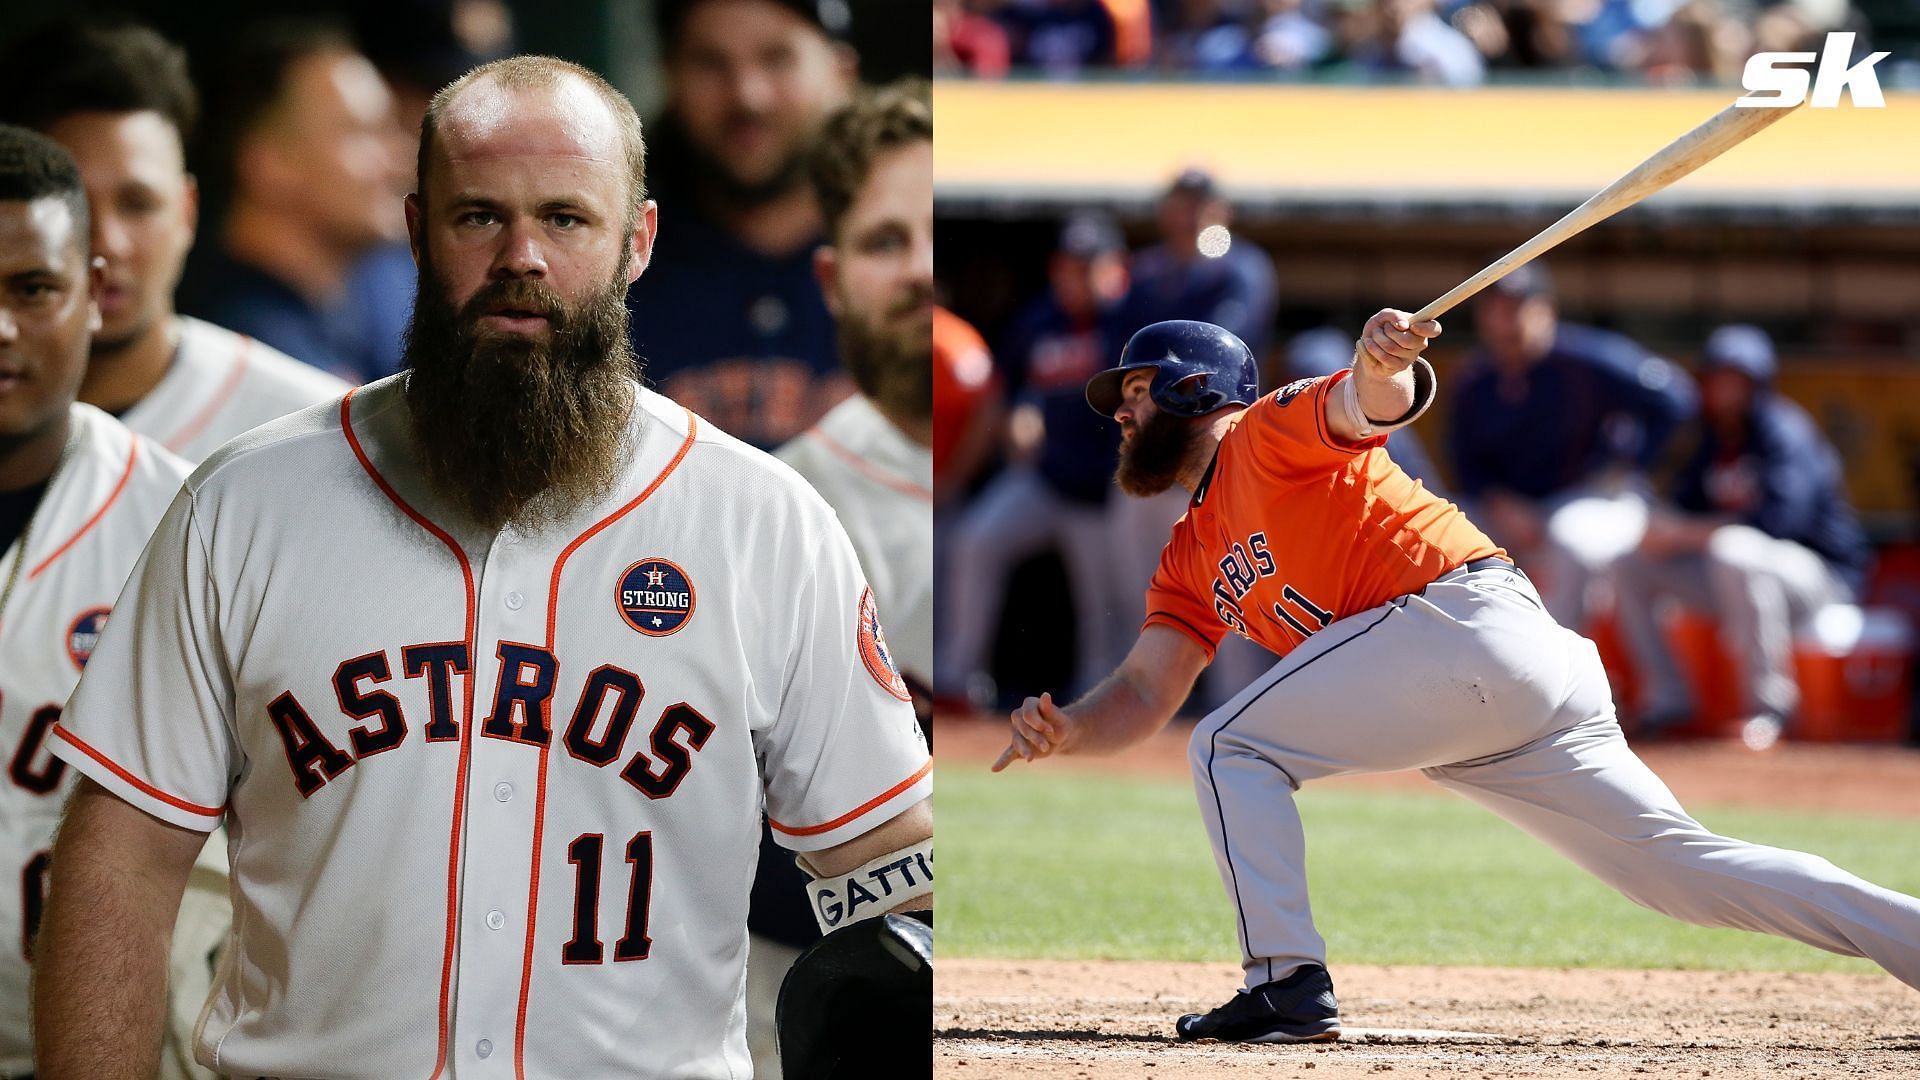 Astros' Evan Gattis: From a janitor in Dallas to World Series champion